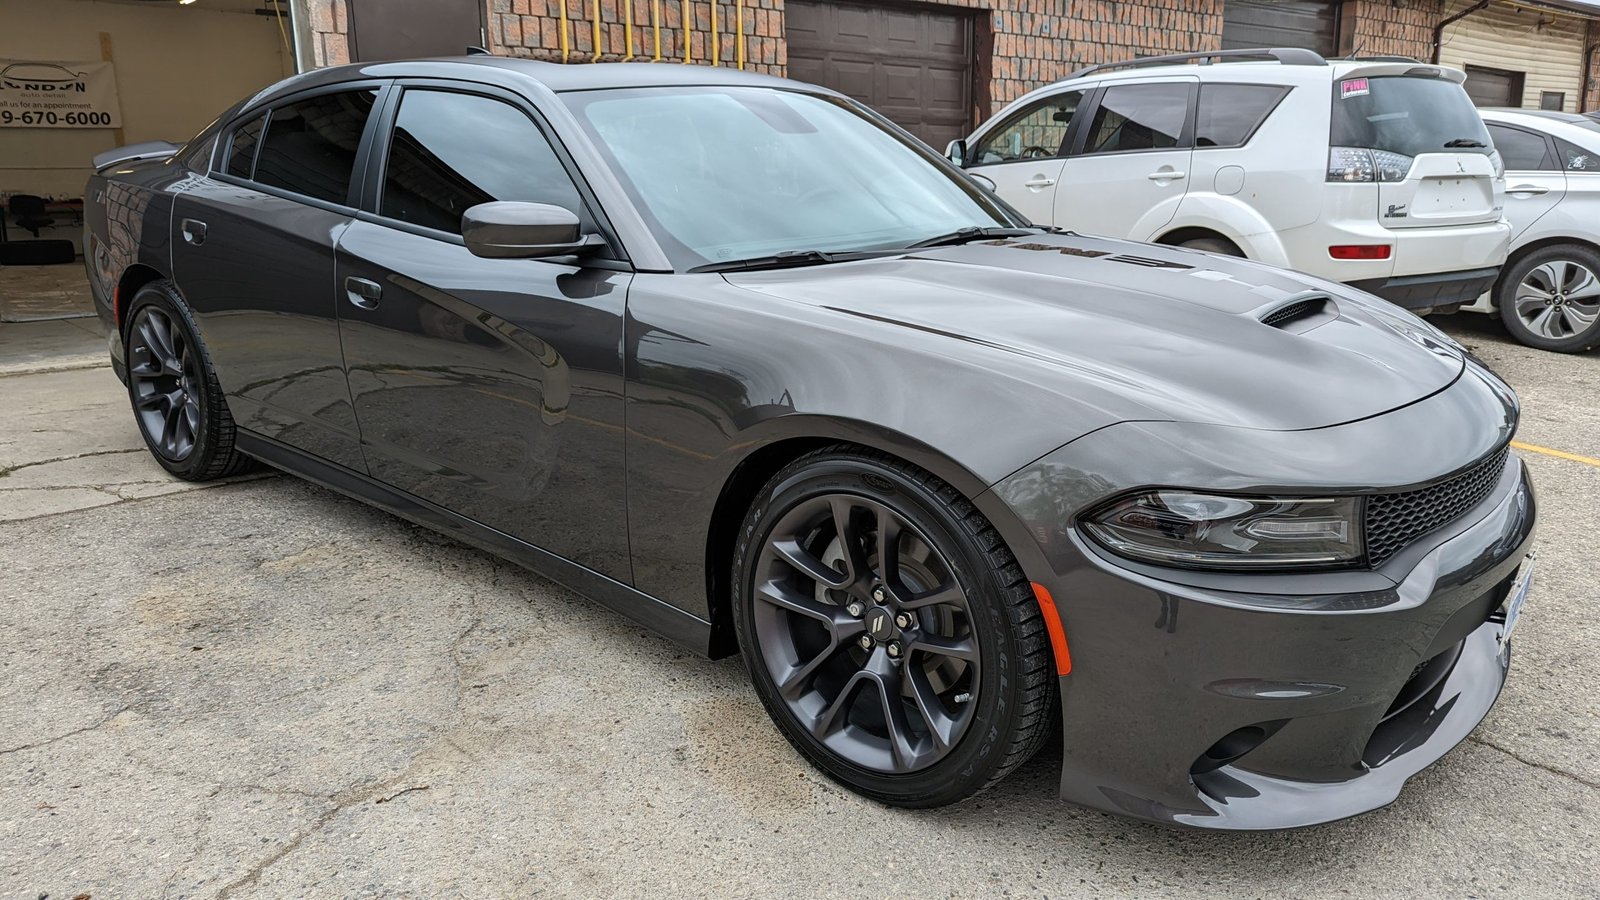 Dodge Charger Ceramic coated